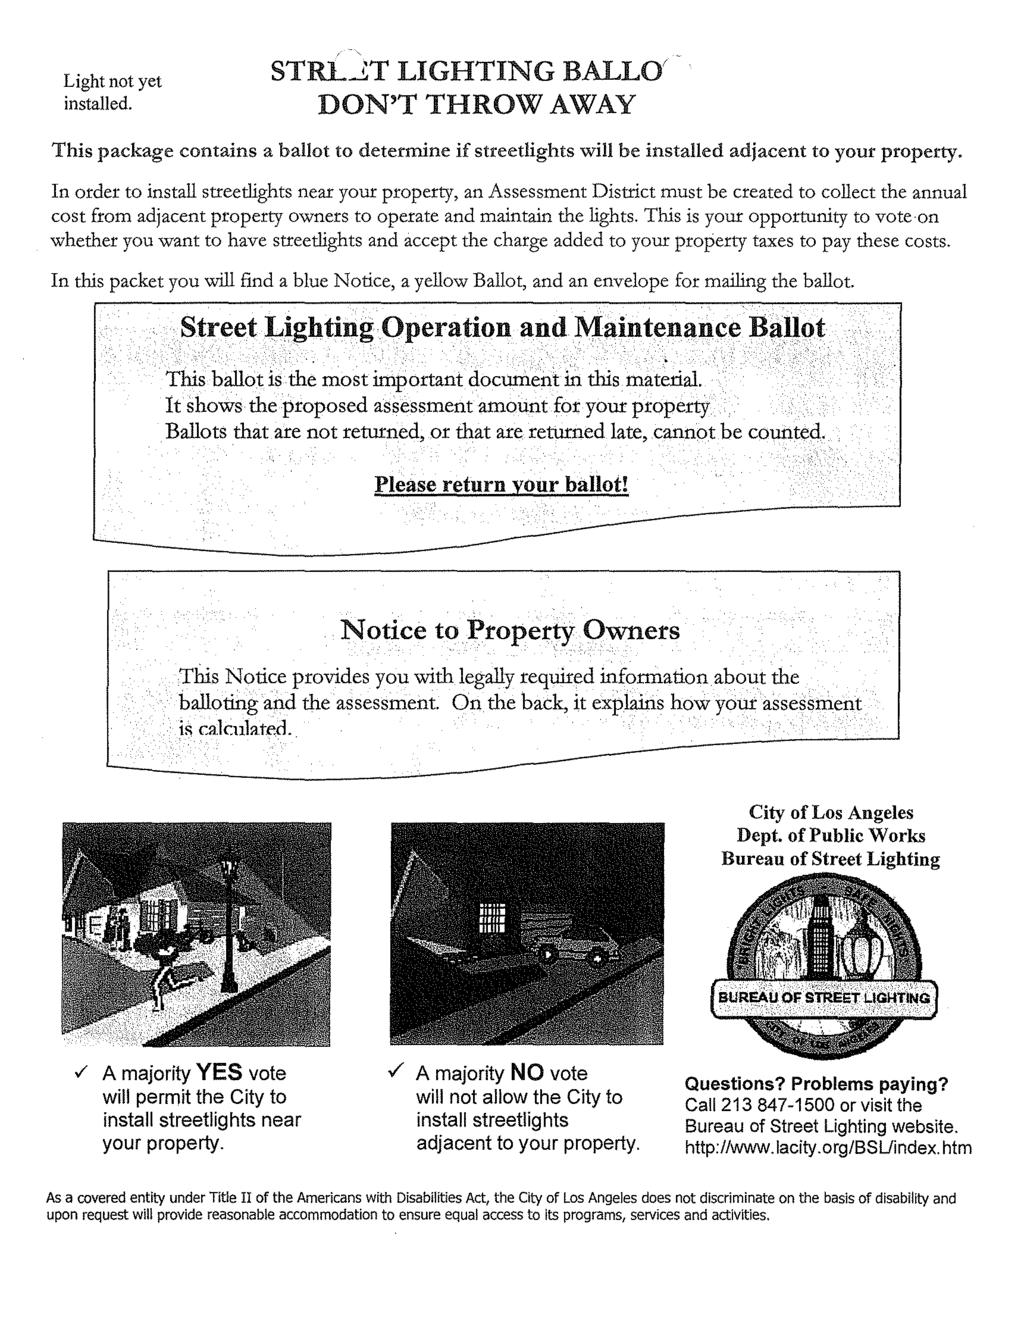 Light not yet installed. -, STRL.JT LIGHTING BALLO! DON'T THROW AWAY This package contains a ballot to determine if streetlights will be installed adjacent to your property.